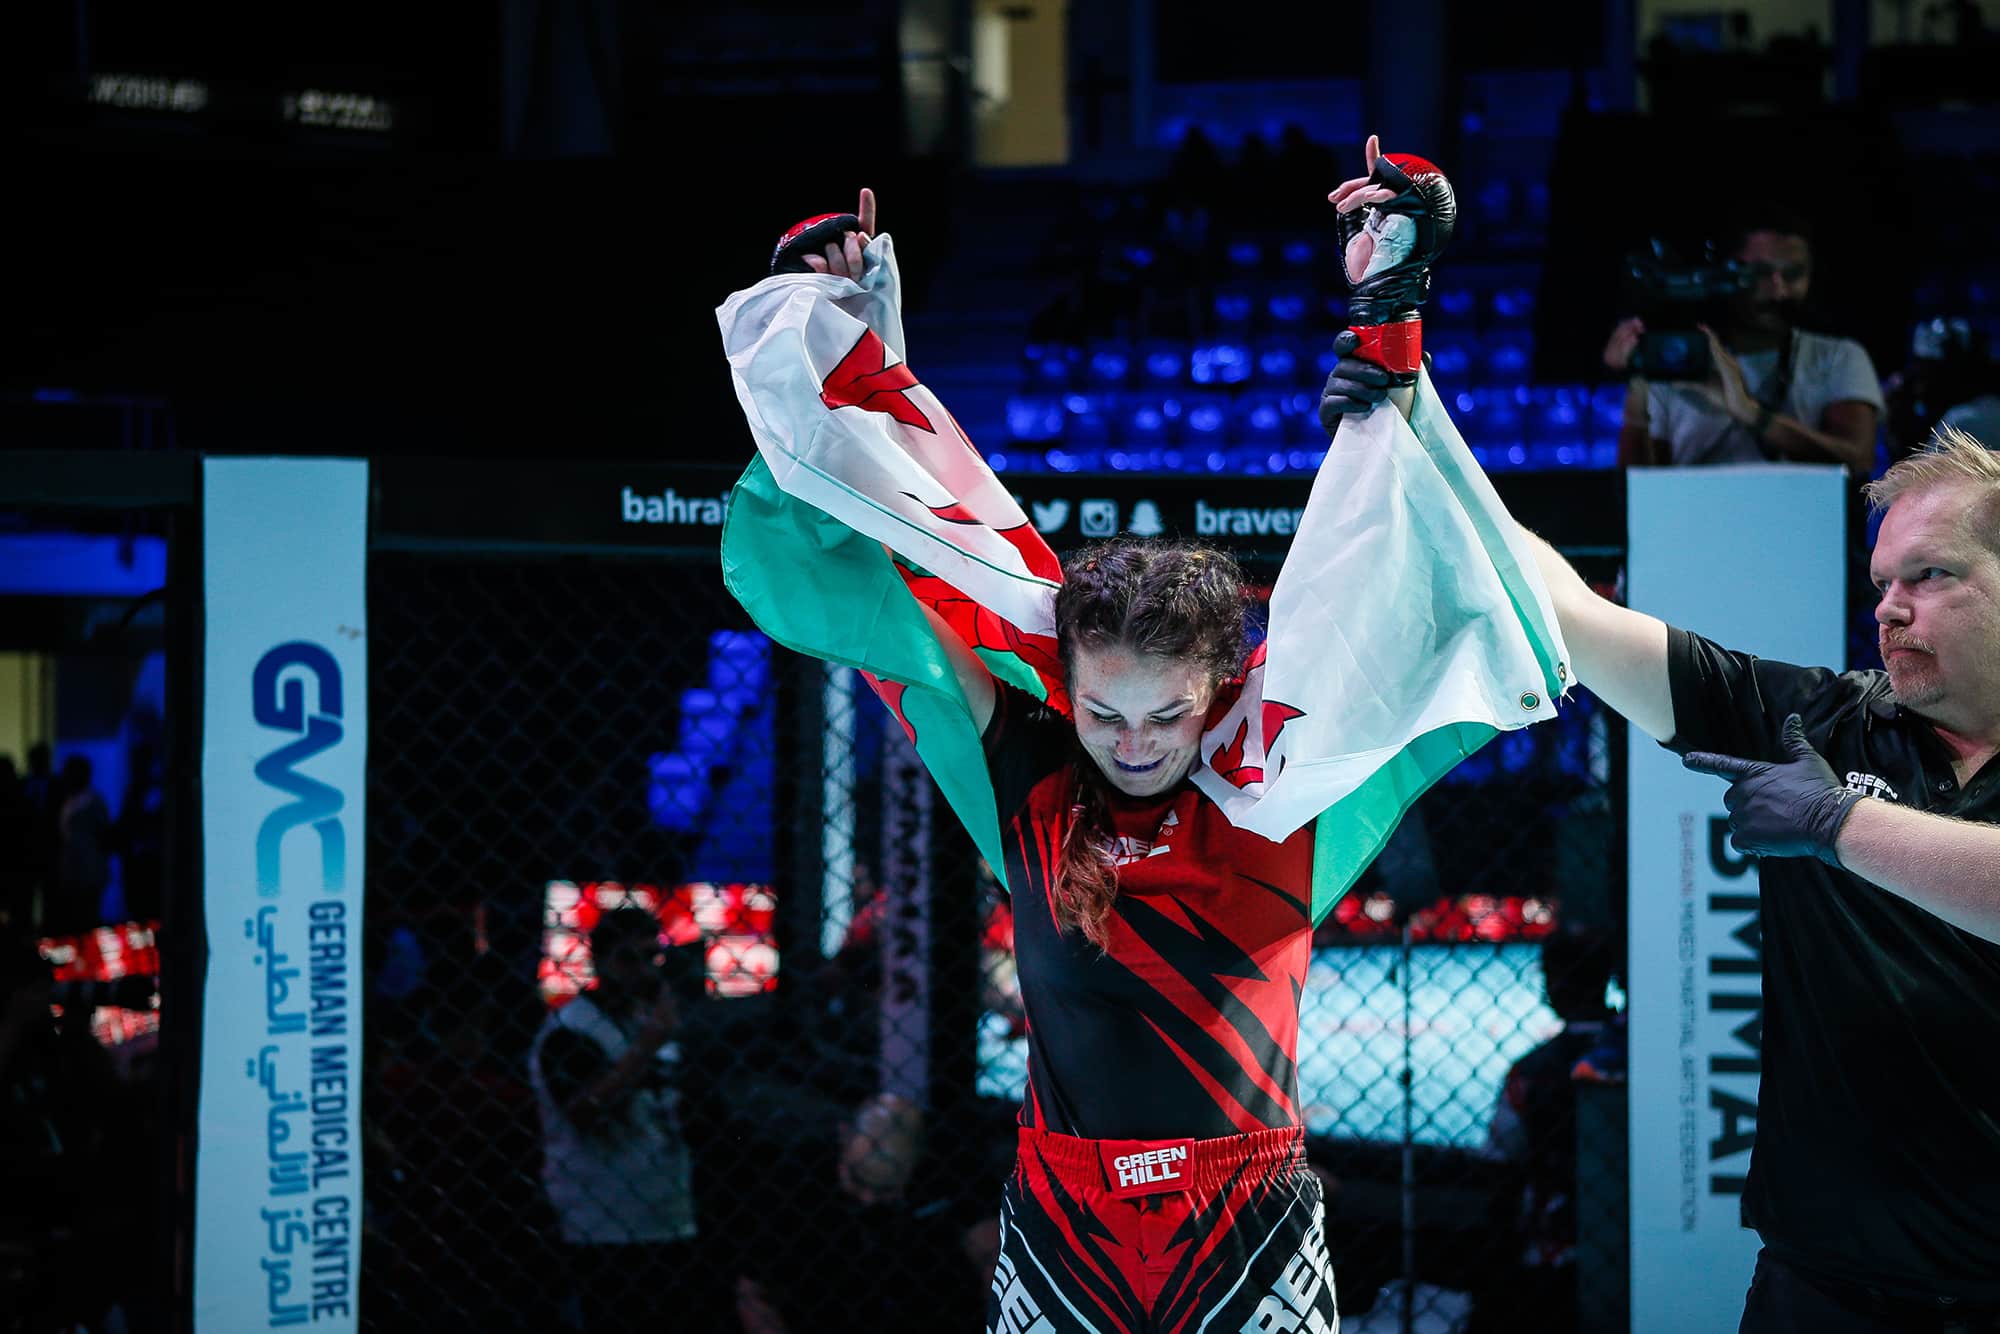 Immaf Best Performance Nominees Announced For 2020 Immaf Amateur Mma